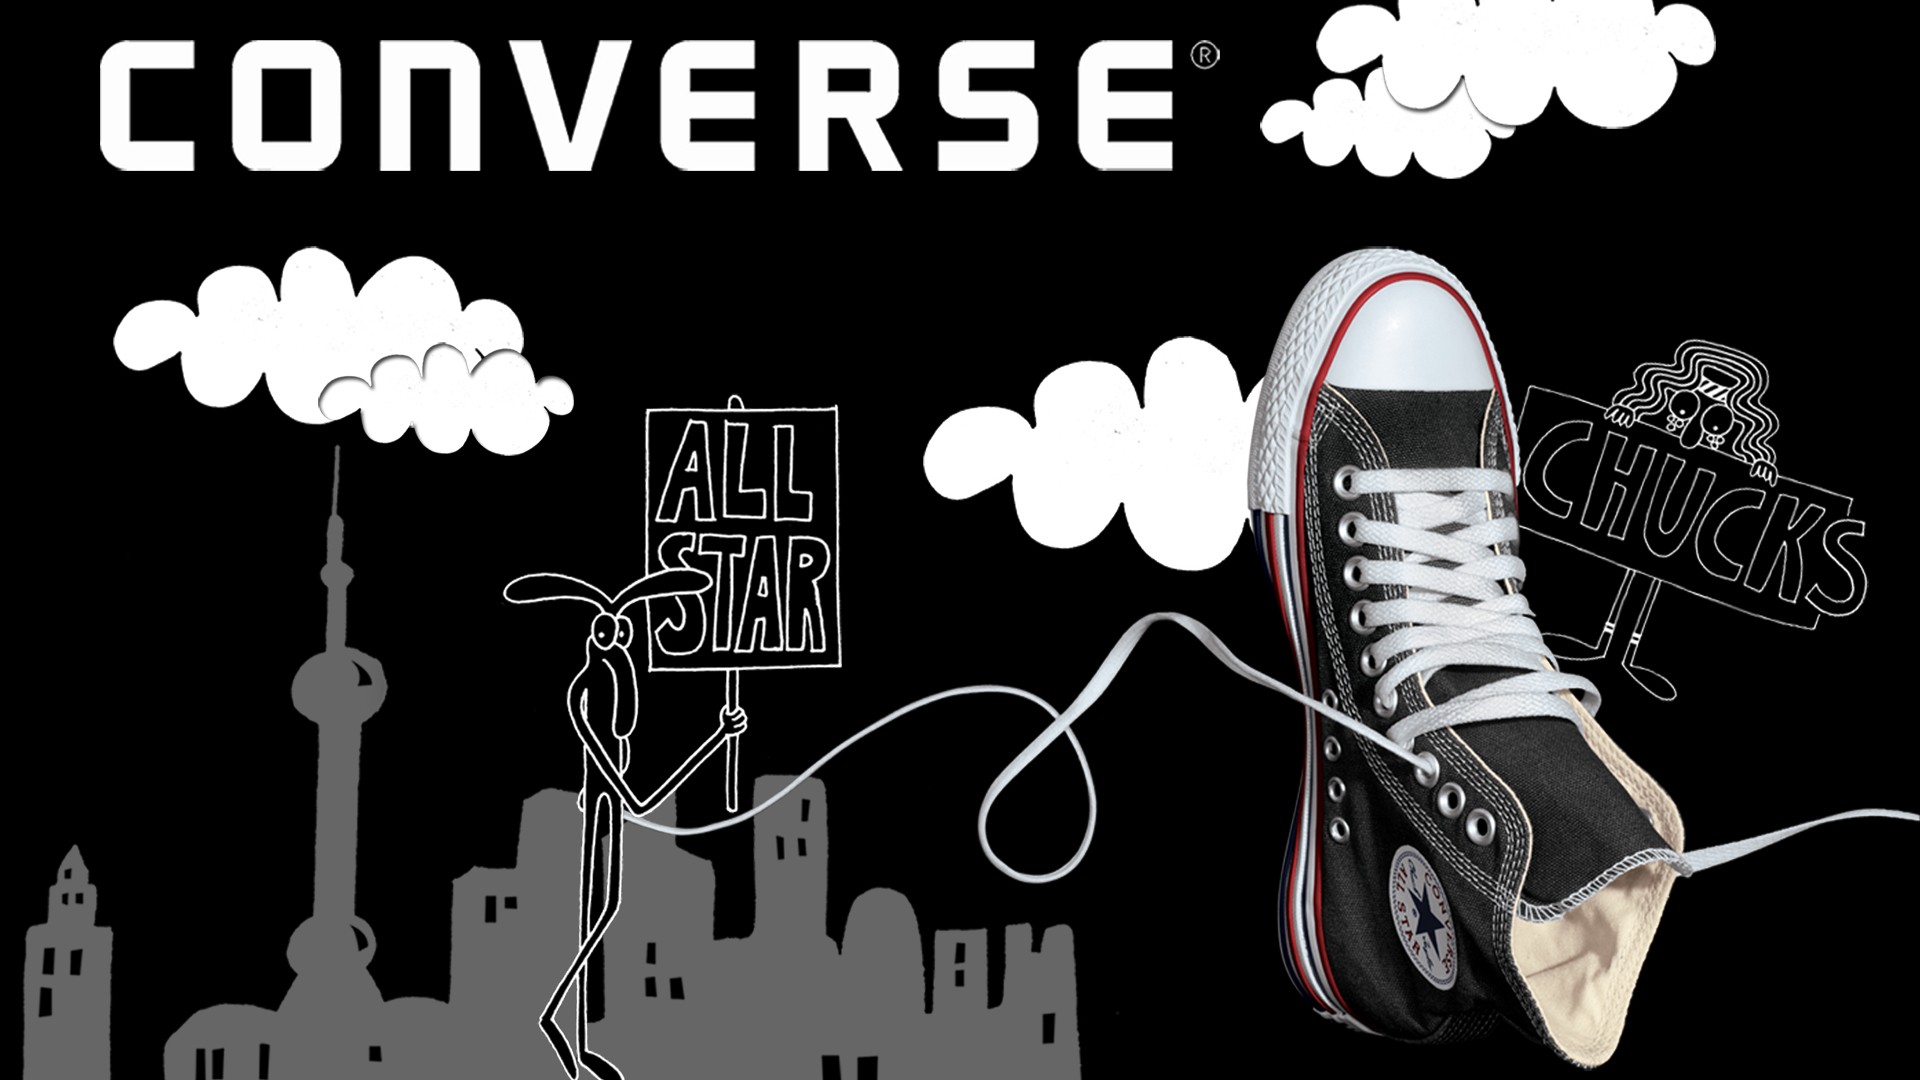 products, converse, shoe